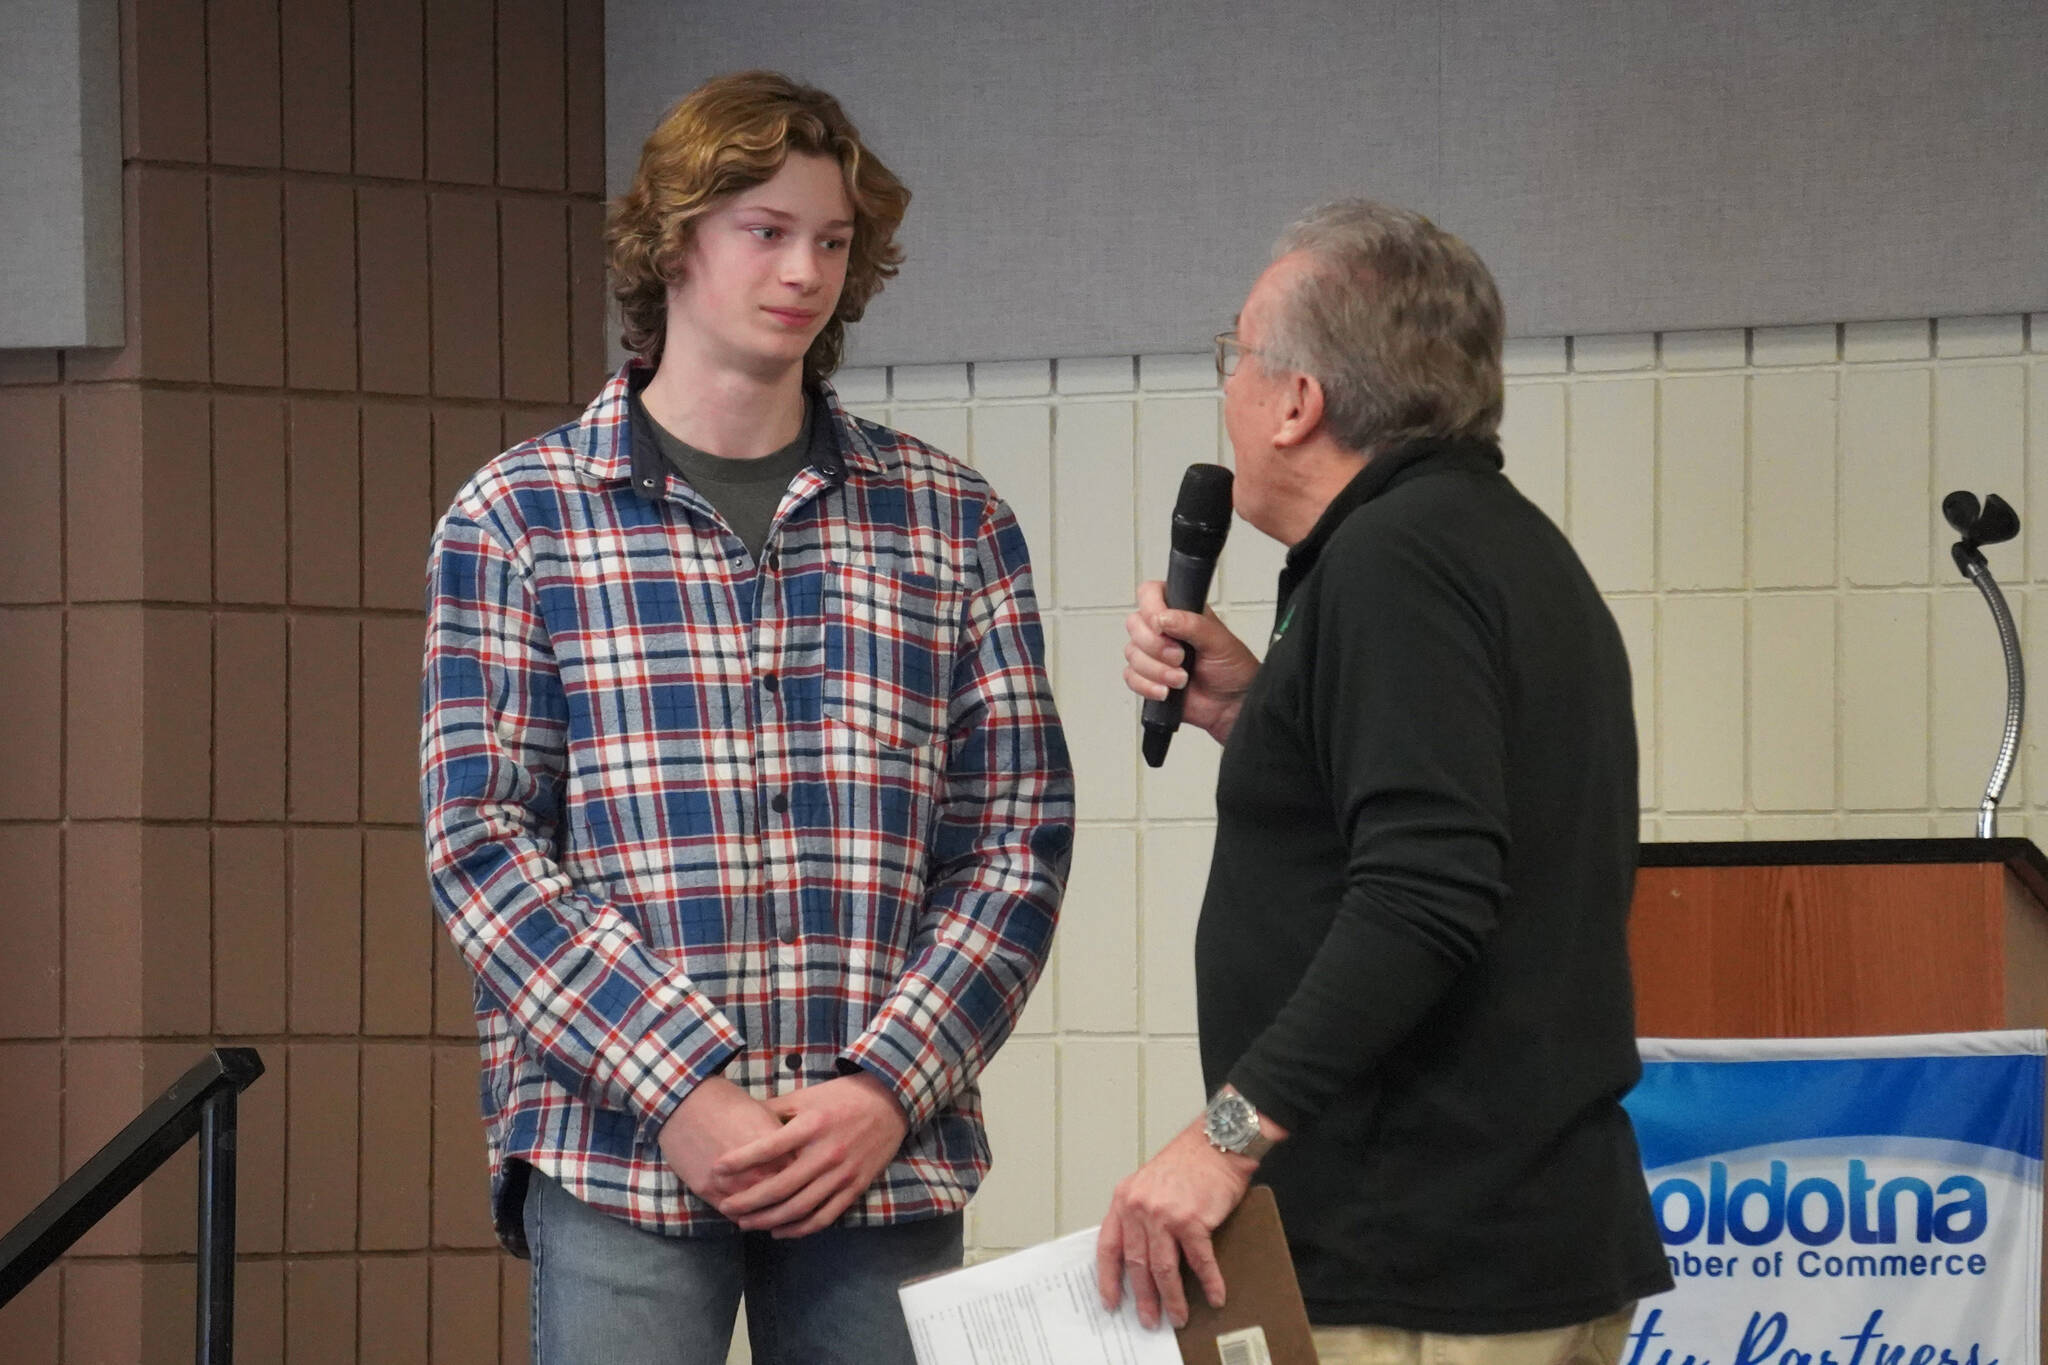 Matthew Schiling, of Cook Inlet Academy, is introduced by Merrill Sikorski at the Caring for the Kenai Awards Celebration held during a Joint Chamber Luncheon on Wednesday, May 3, 2023, at the Soldotna Regional Sports Complex in Soldotna, Alaska. (Jake Dye/Peninsula Clarion)